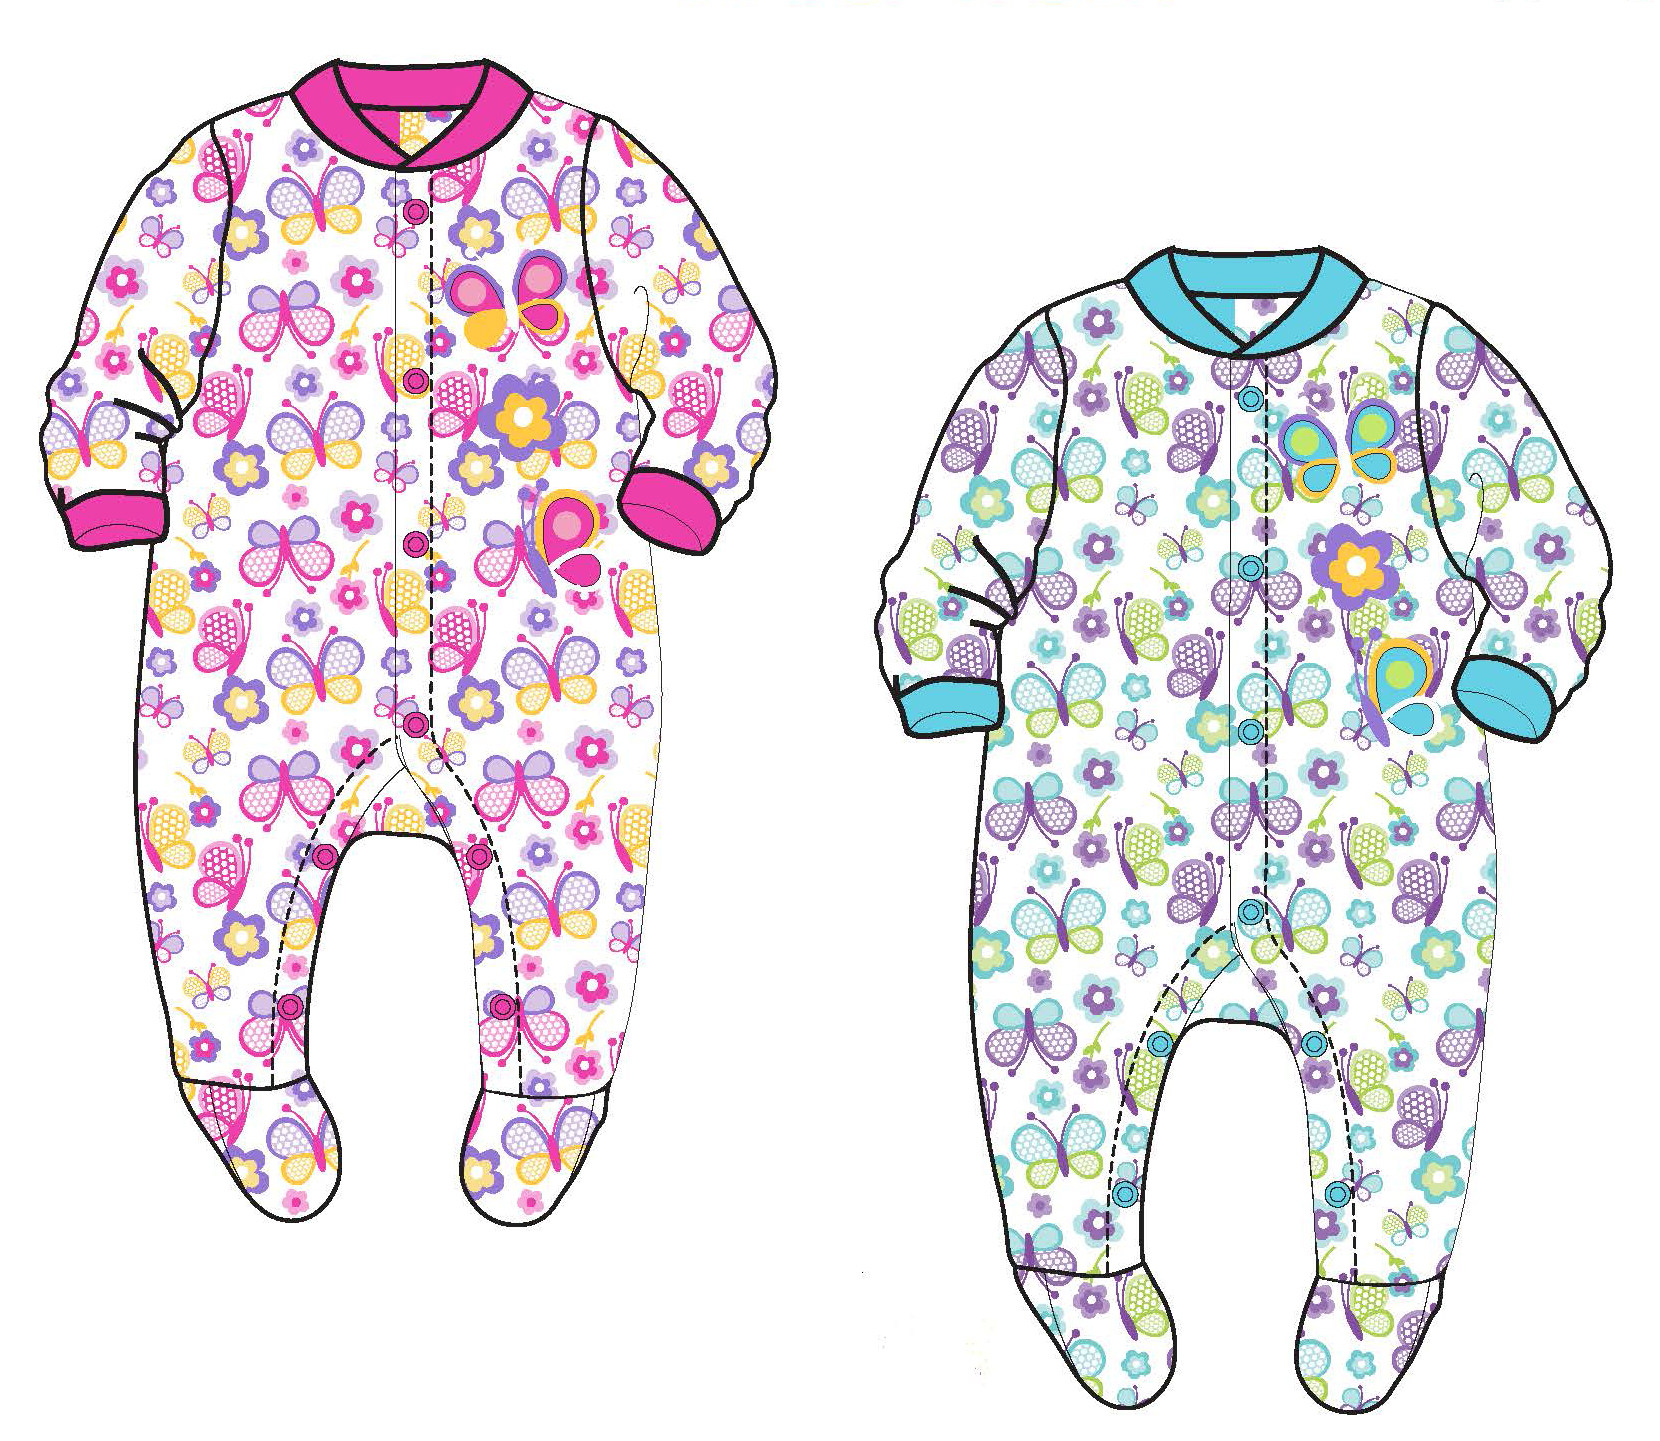 Baby Girl's Knit One-Piece Footed PAJAMAS w/ Butterfly & Flower Print - Sizes 0/3M-9M